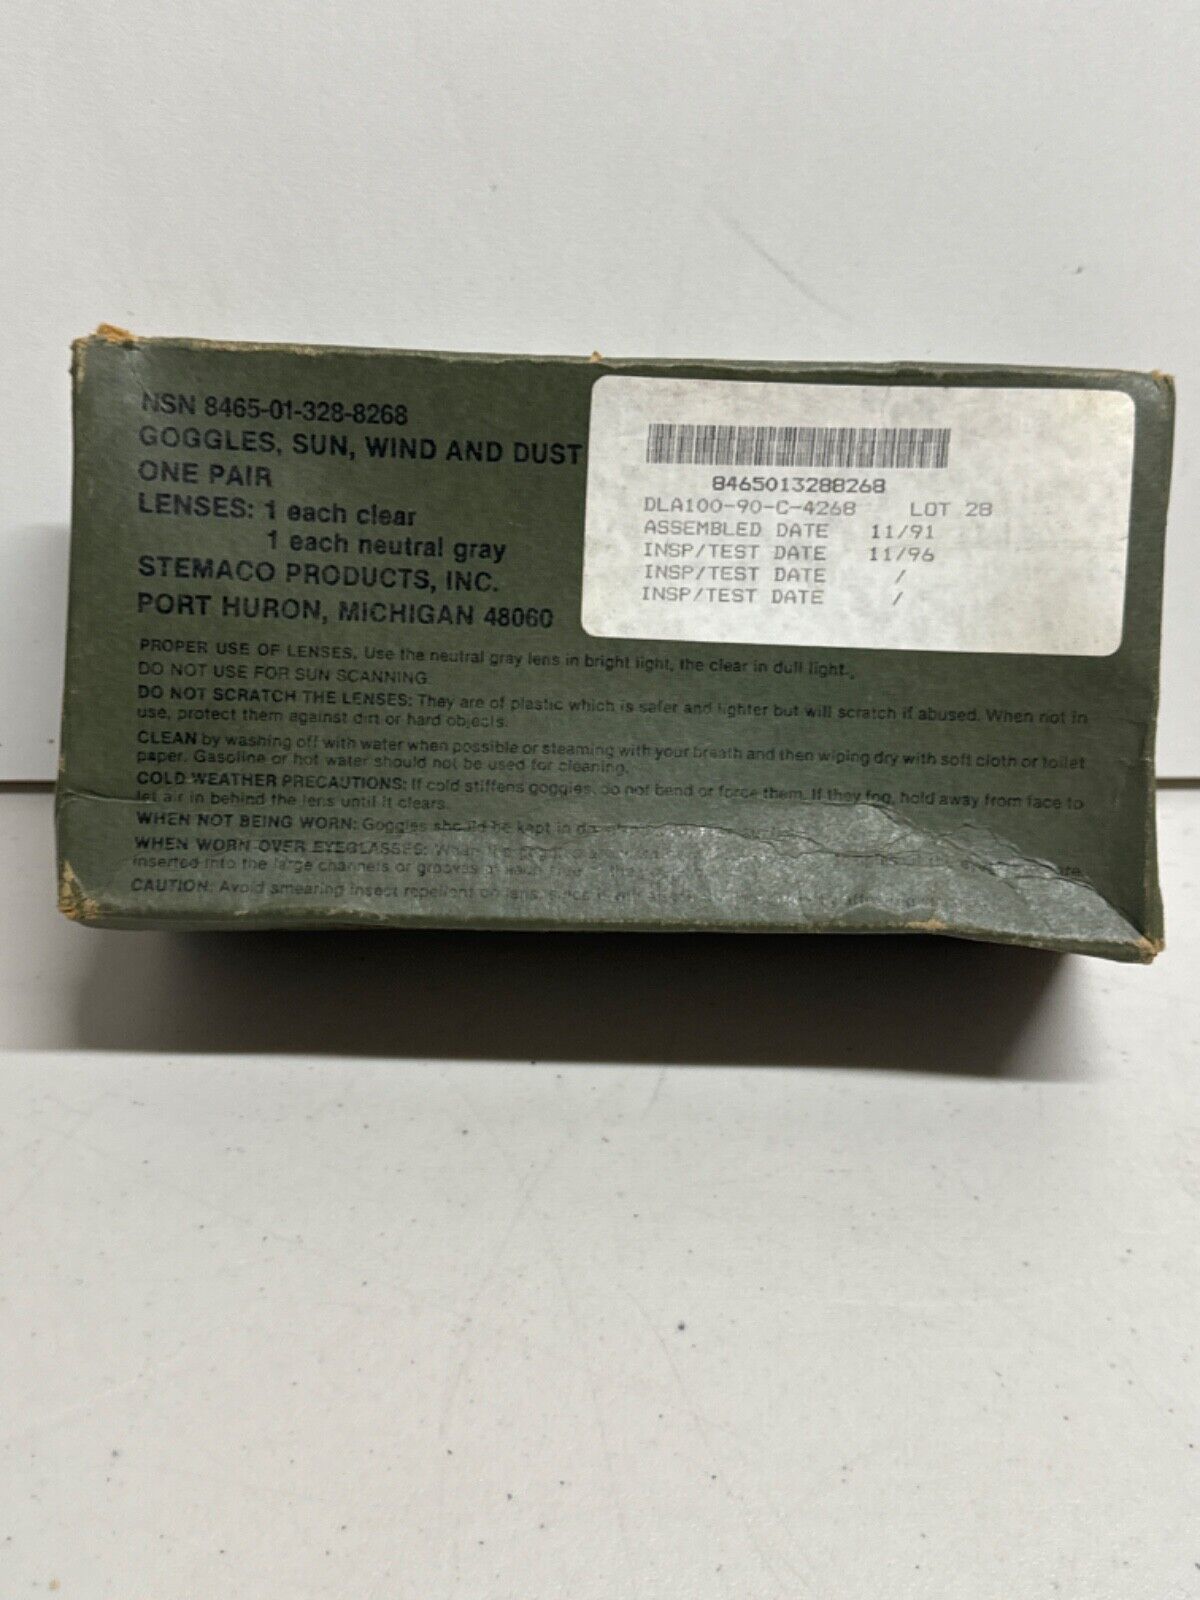 US Military Goggles 8465013288268 in box with ballistic Lenses